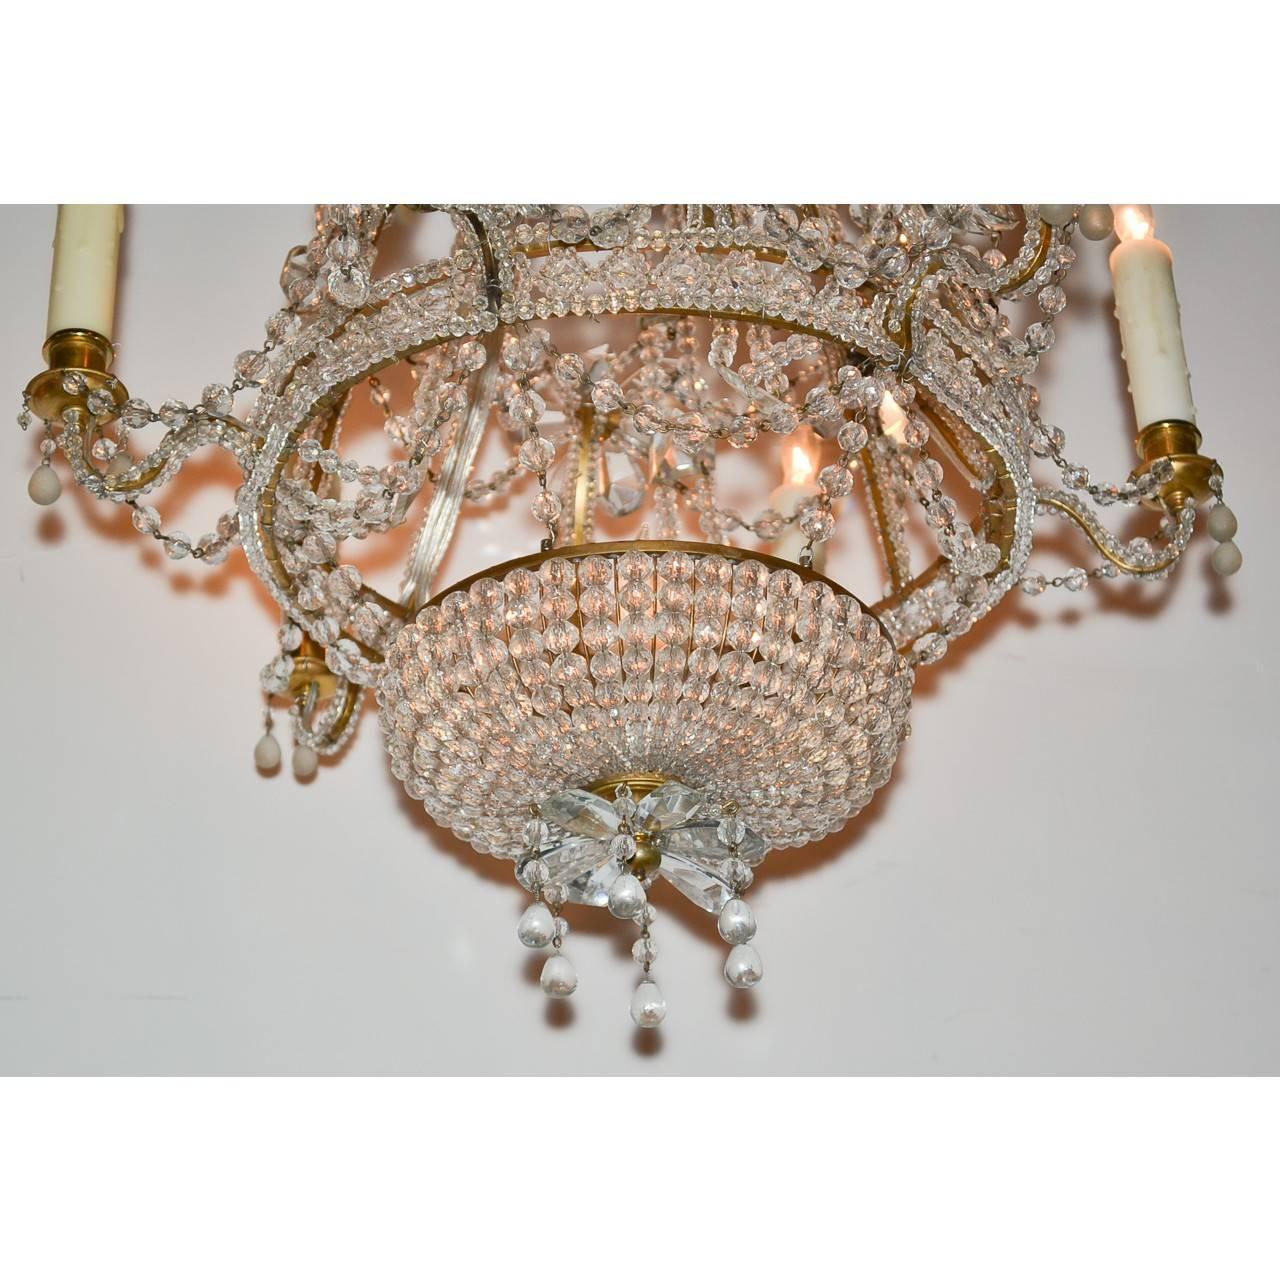 Pretty Italian six light beaded chandelier with gold accents for that perfect spot in your home. Unique design.
Made in Italy, circa 1920.
We will supply three feet of chain and a canopy.
Measures: 18 inches wide x 25 inches height.